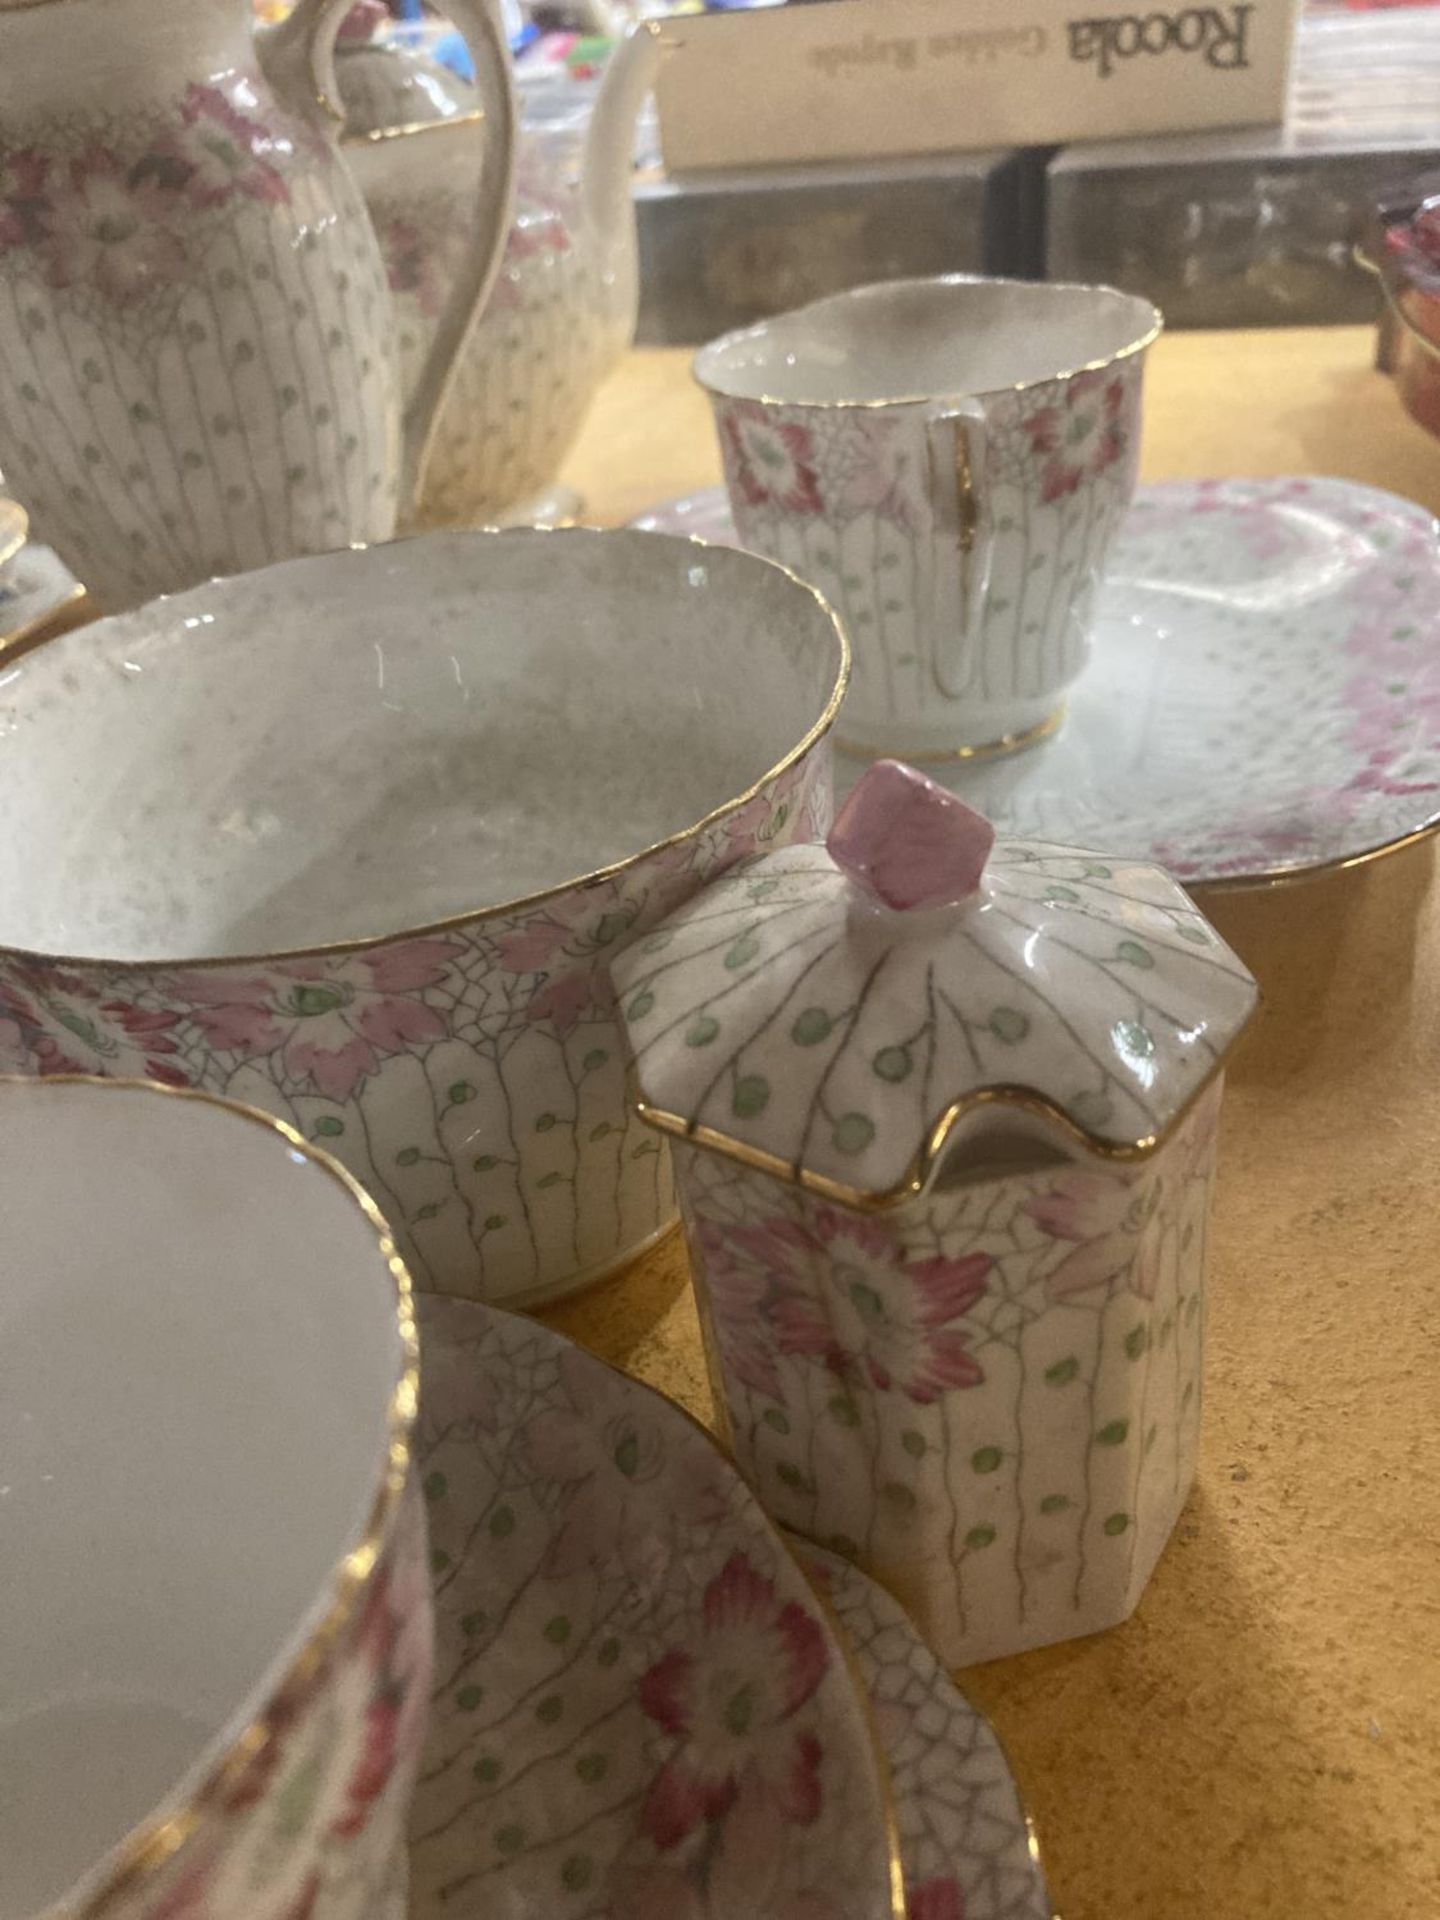 A DELPHINE CHINA TEA AND COFFEE SET IN A PALE PINK FLORAL PATTERN TO INCLUDE A TEA POT, COFFEE - Image 5 of 6